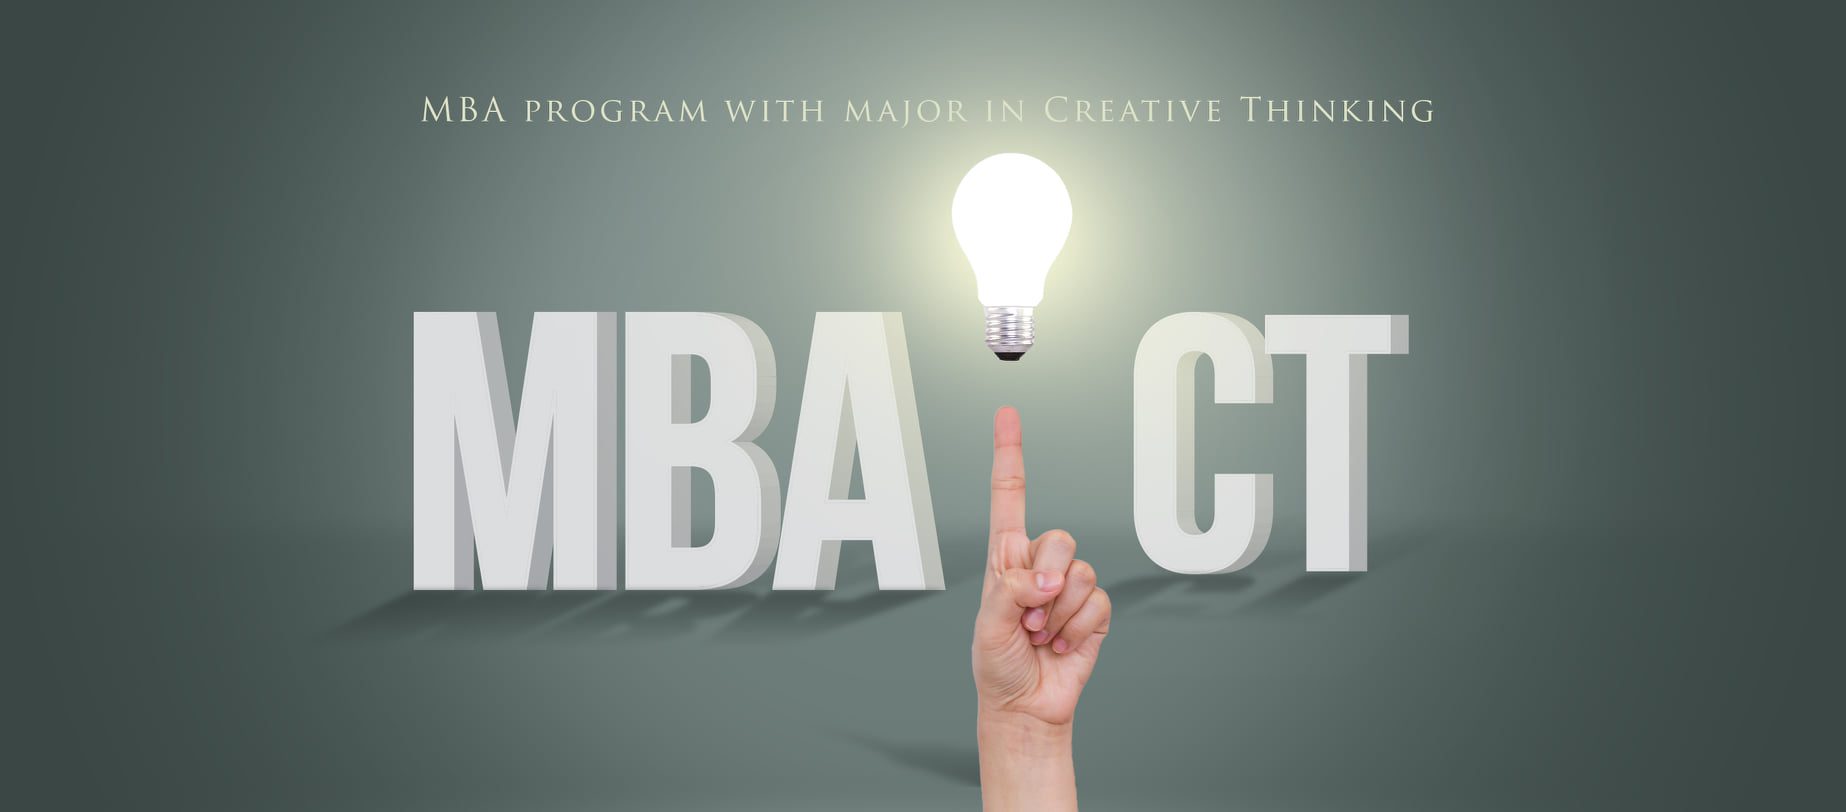 MBA Program with major in Creative Thinking (MBA-CT)